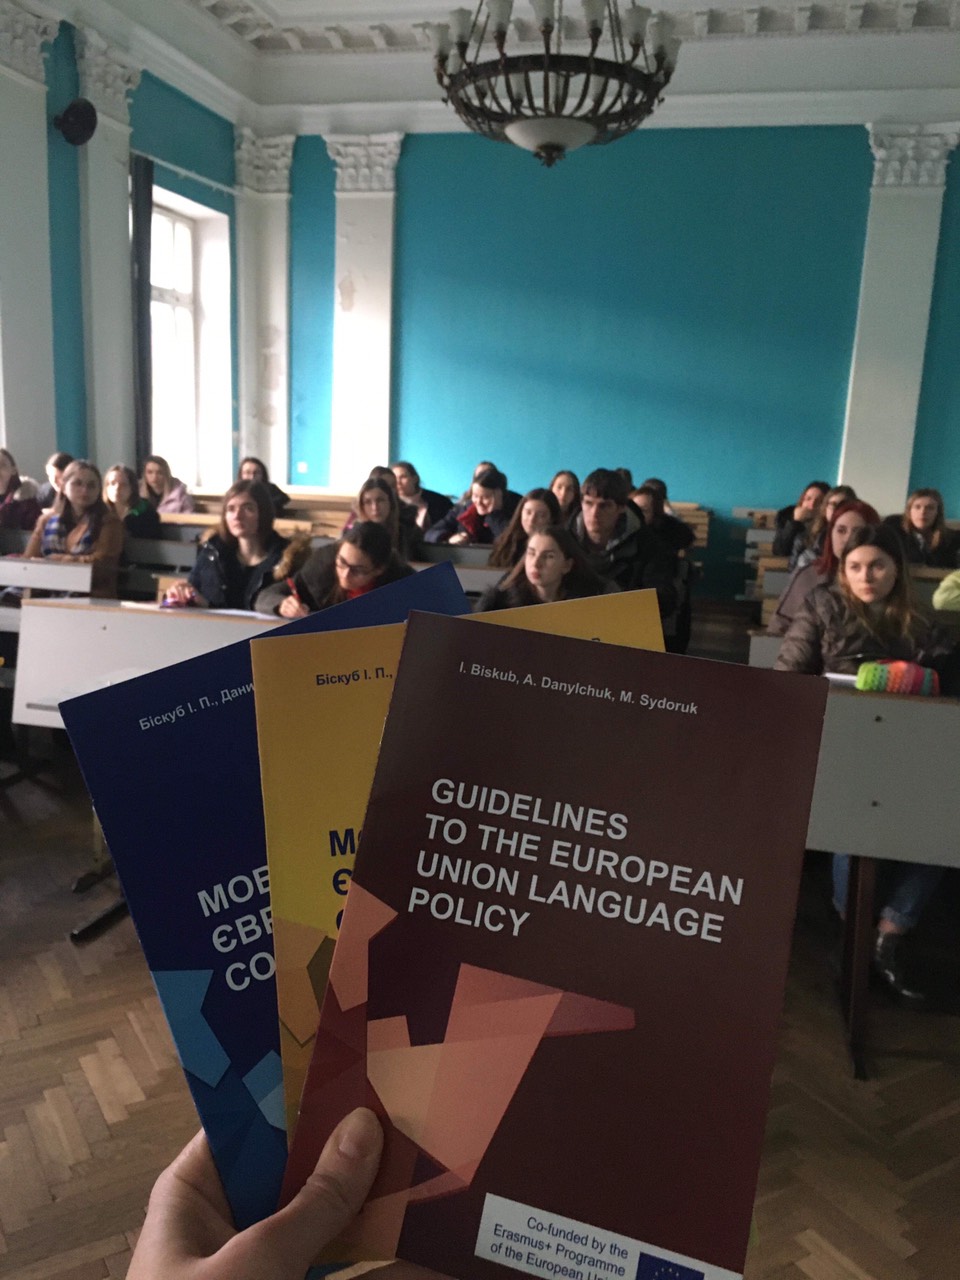 EUROPEAN UNION LANGUAGE POLICY: 3rd YEAR LAUNCH